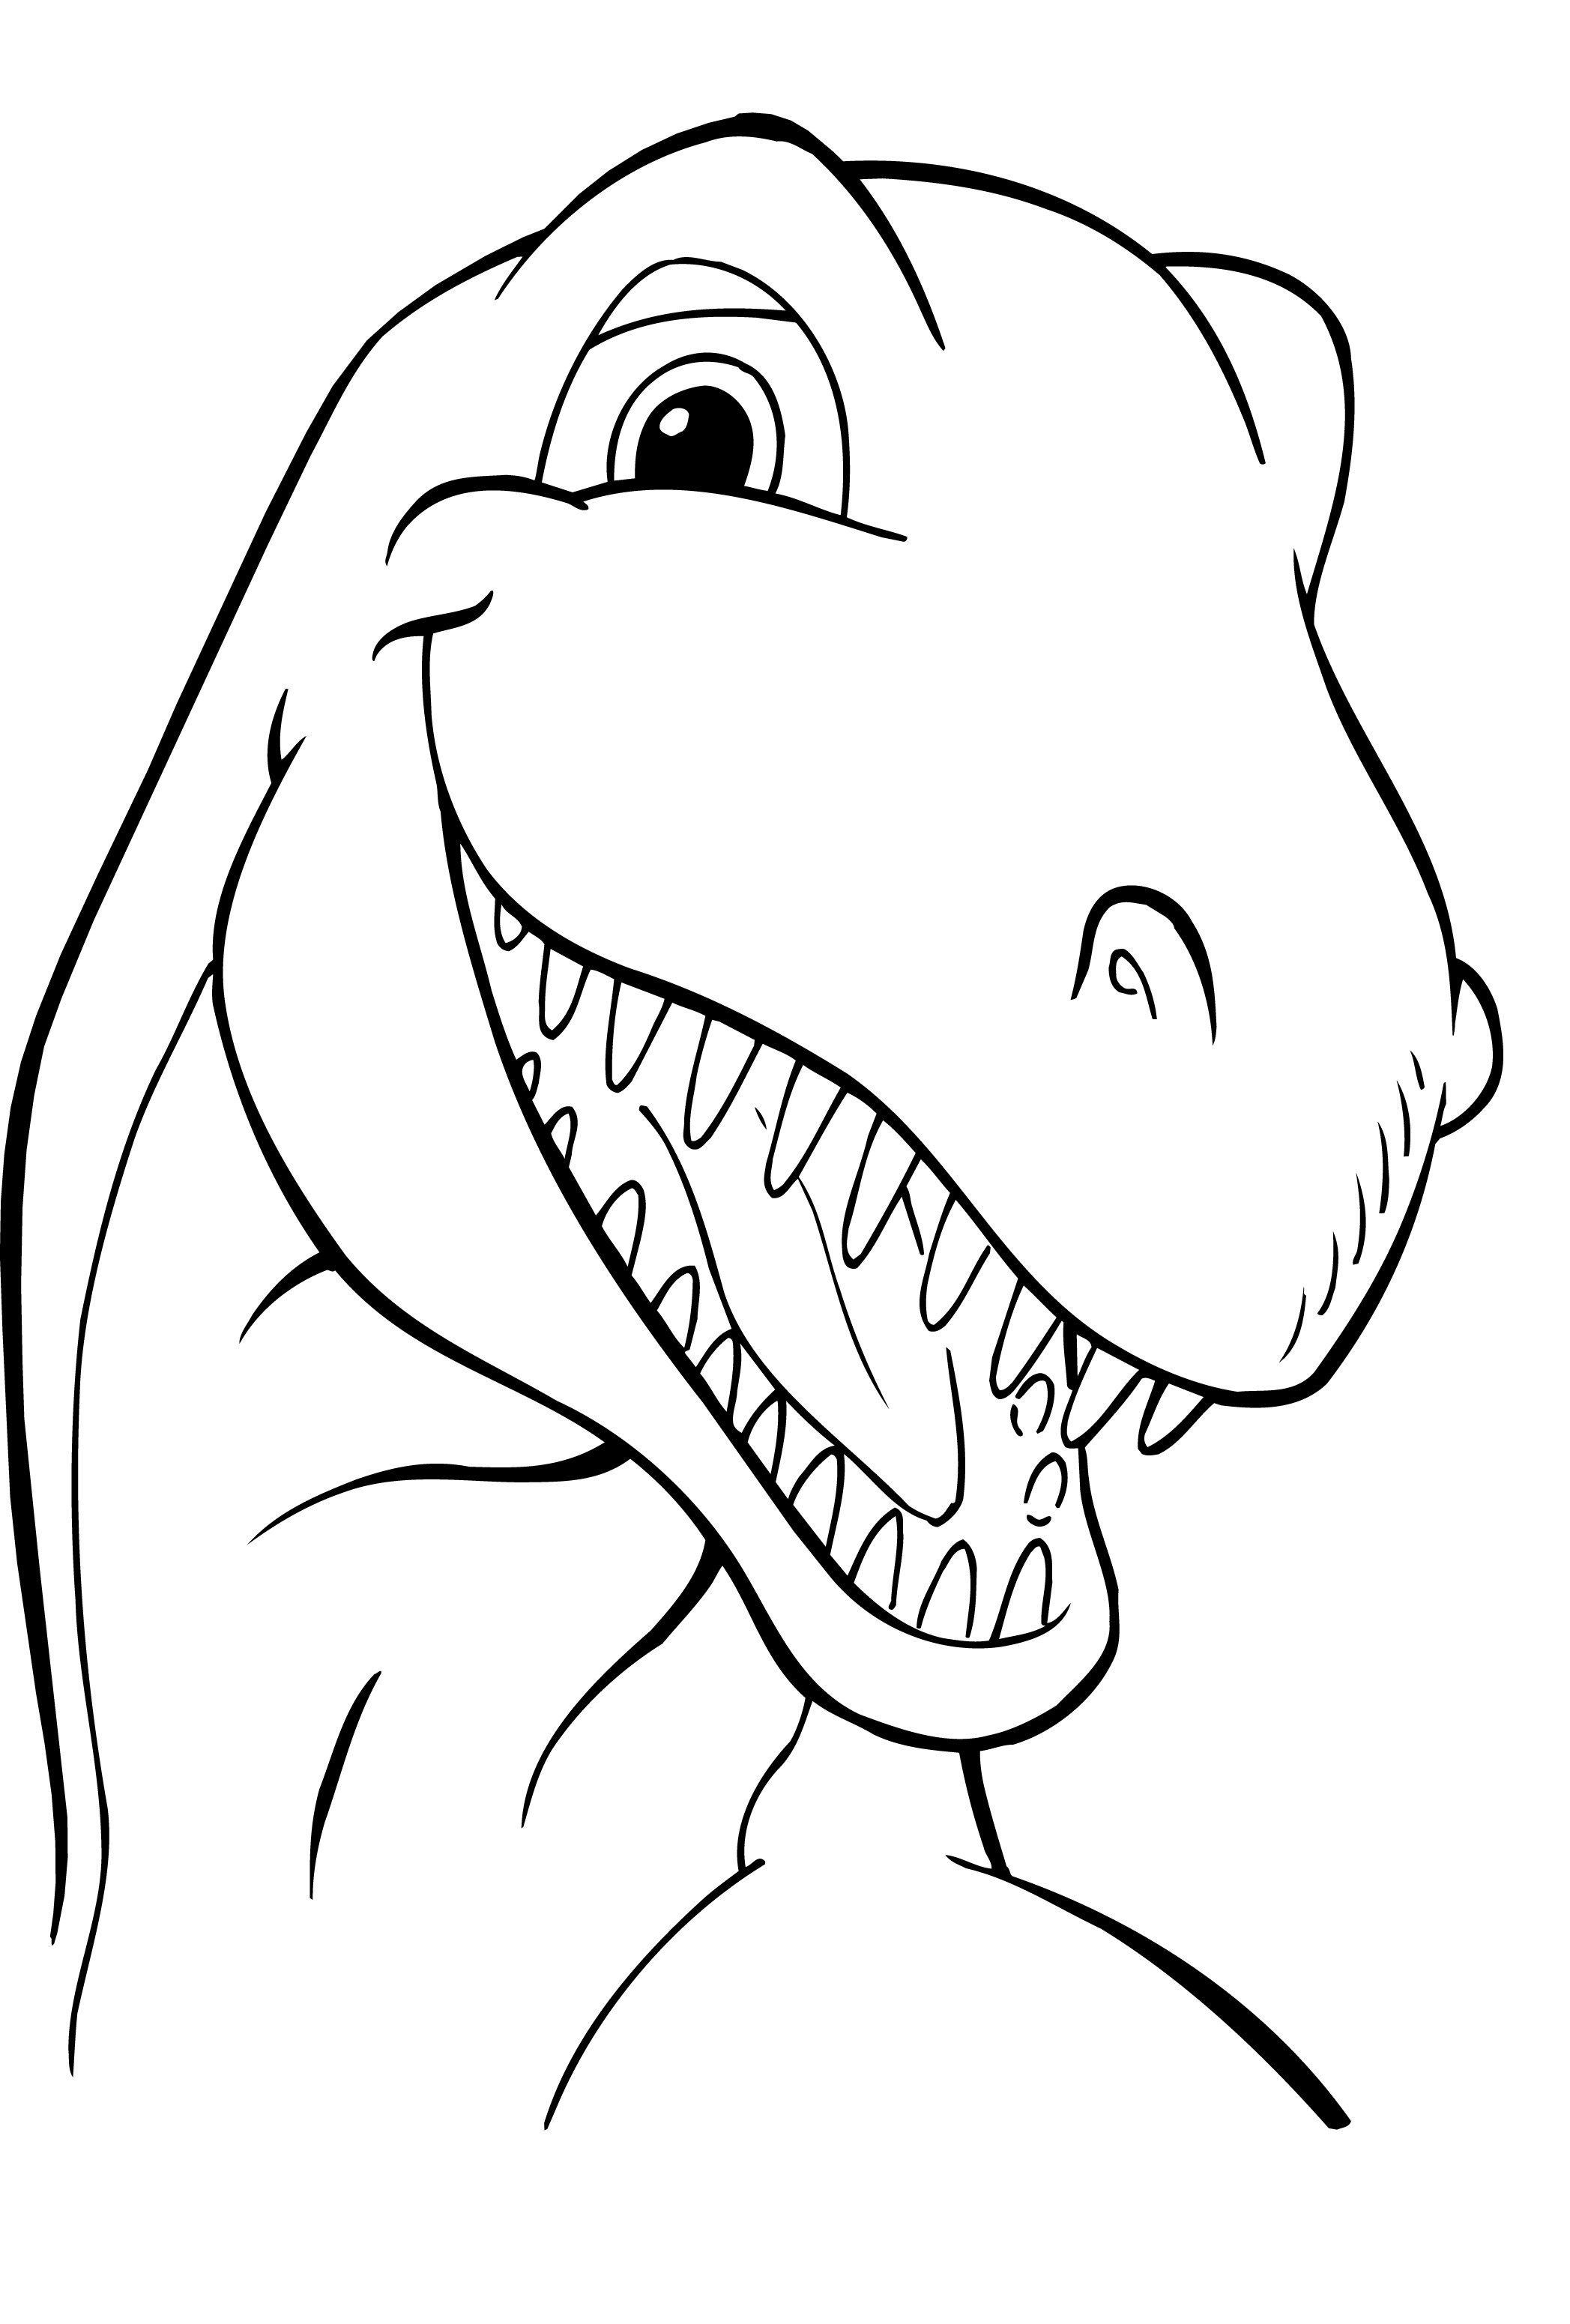 coloring-pages-for-kids-boys-dinosaurs-coloring-pages